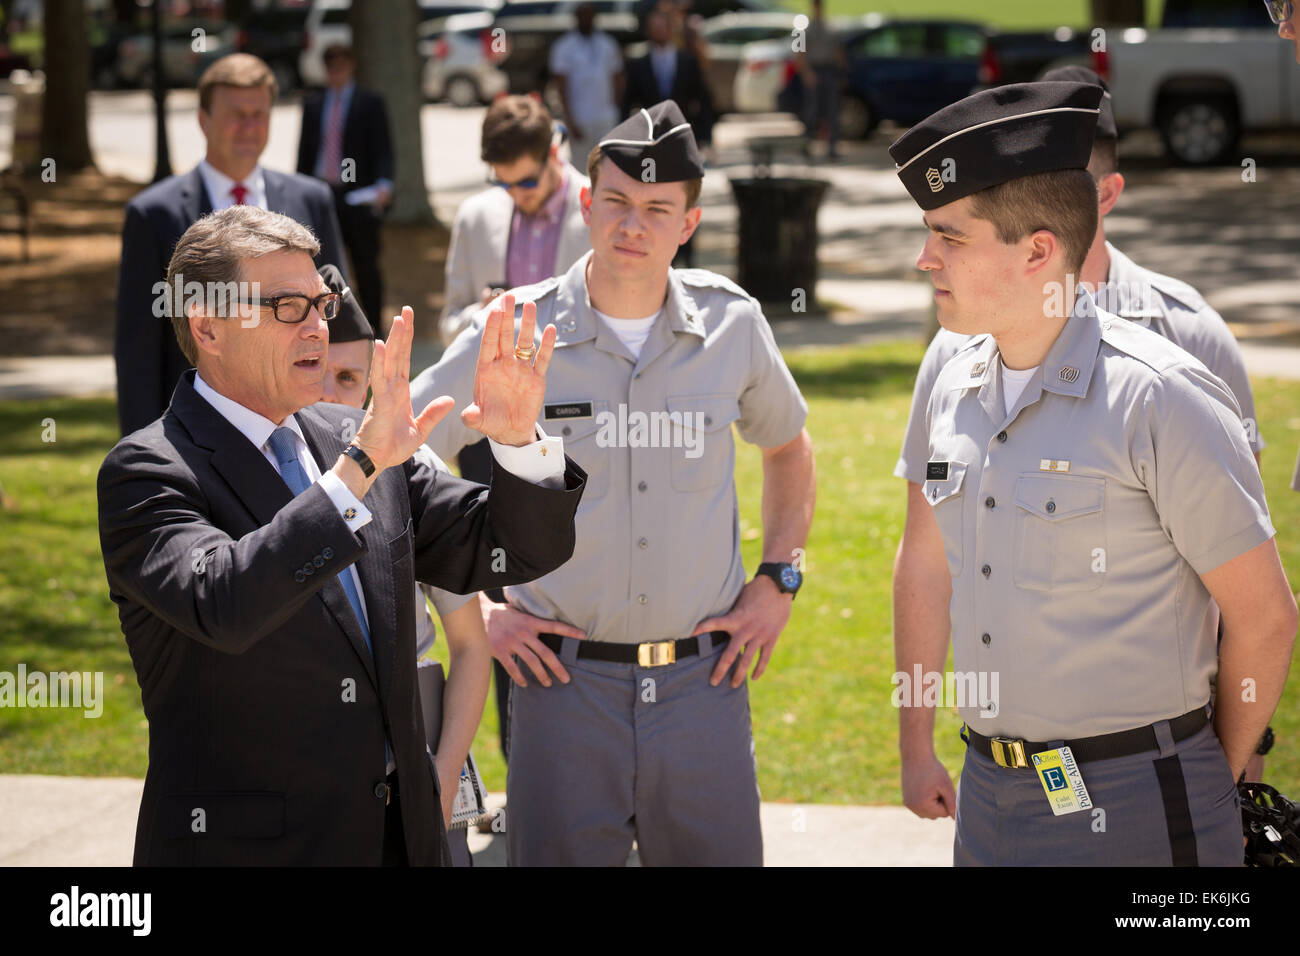 Former Texas Governor and potential Republican presidential candidate Rick Perry tours the campus and monuments of the Citadel military college April 6, 2015 in Charleston, South Carolina. Stock Photo